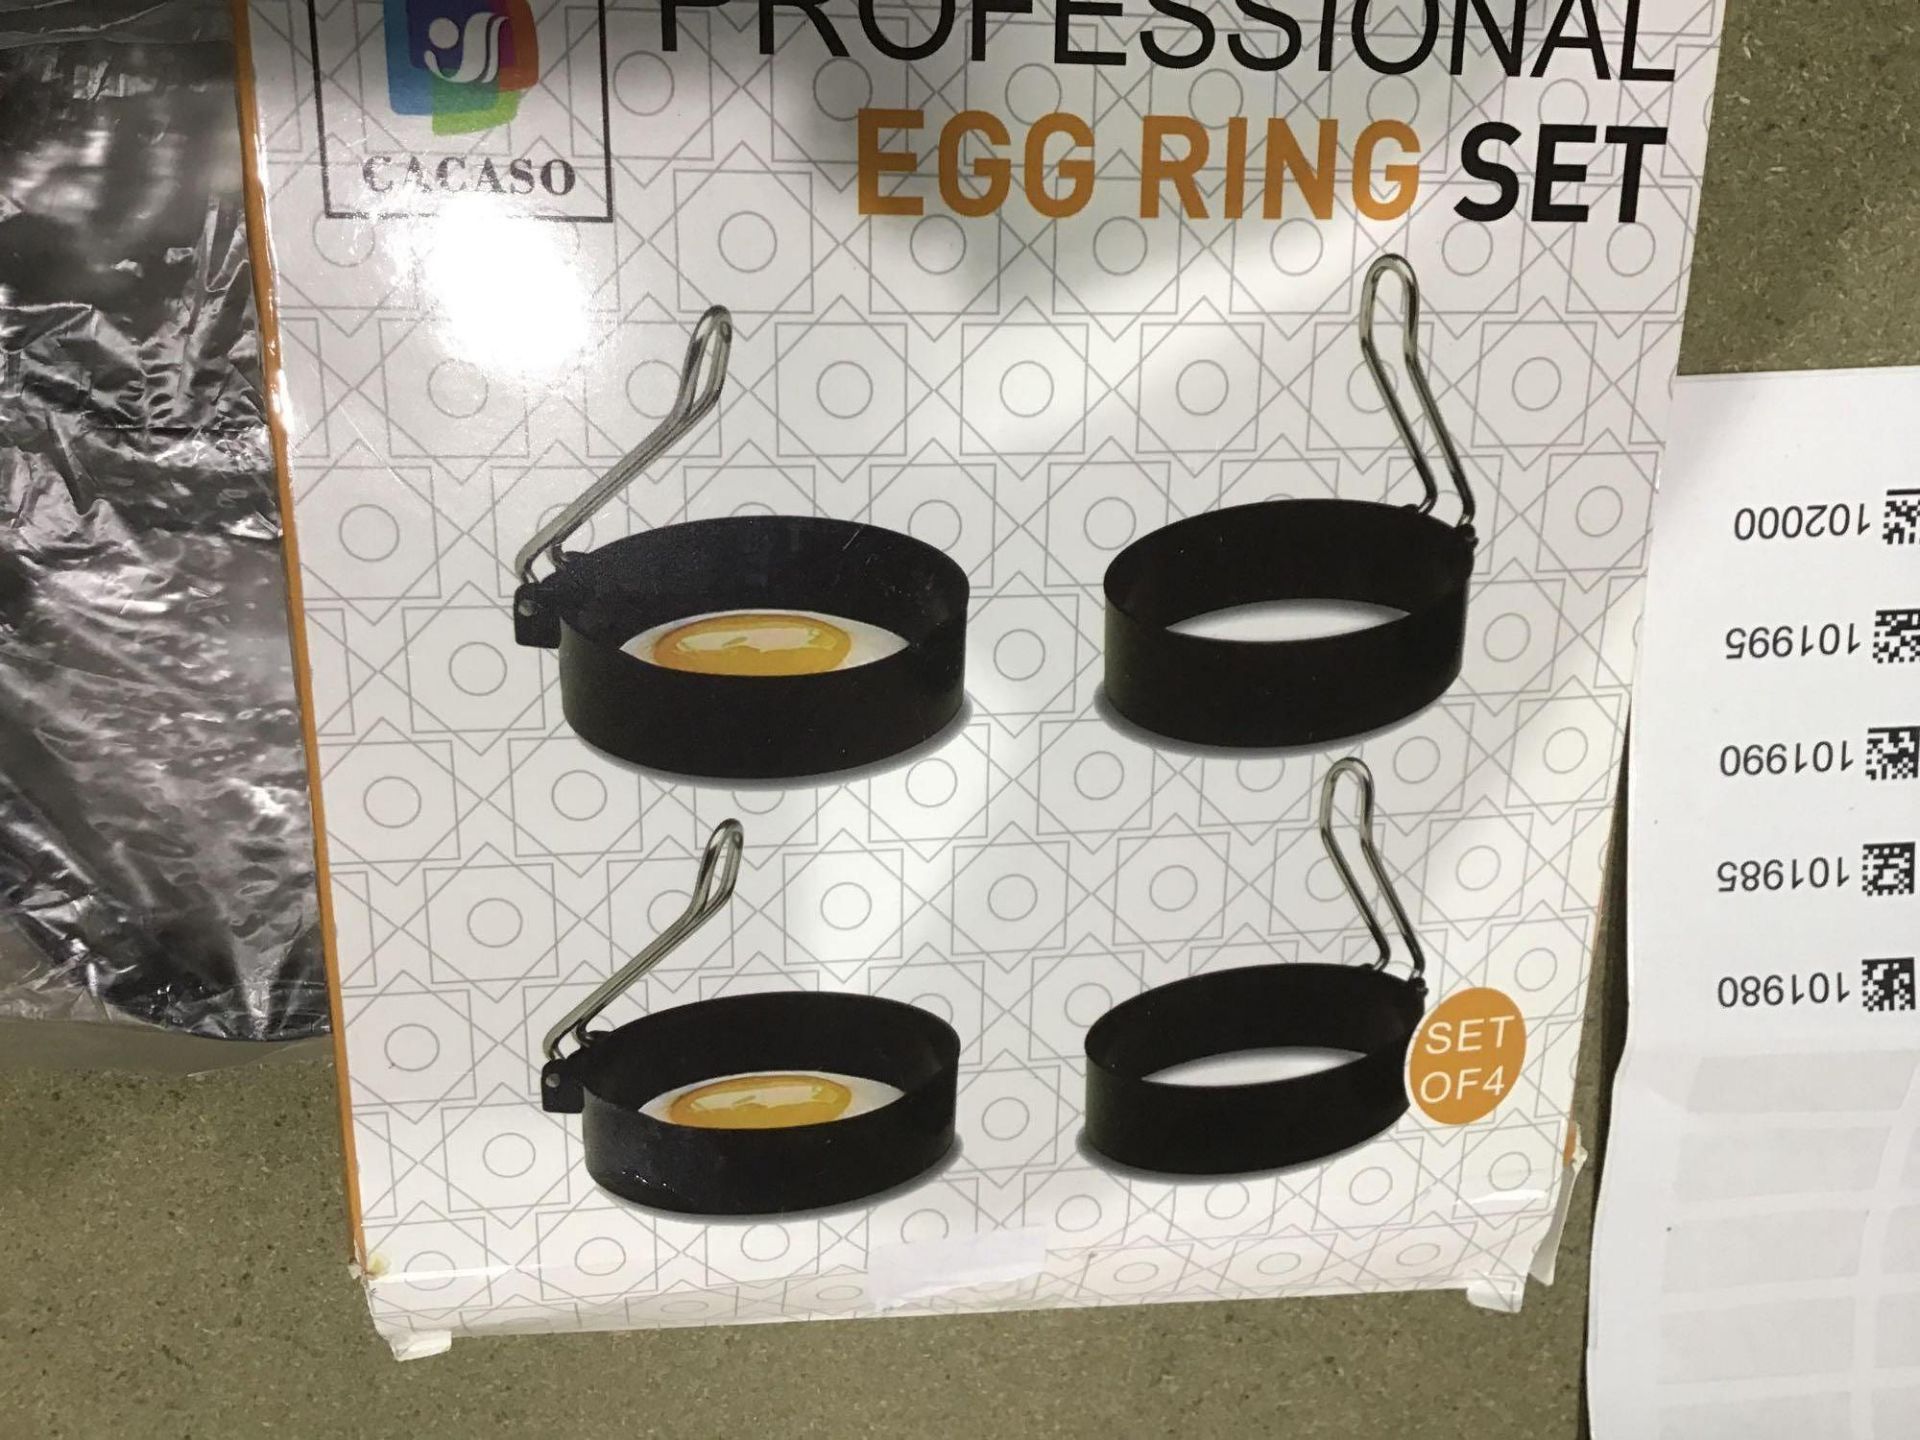 CACASO Professional Egg Ring Set of 4 £7.99 RRP - Image 3 of 4